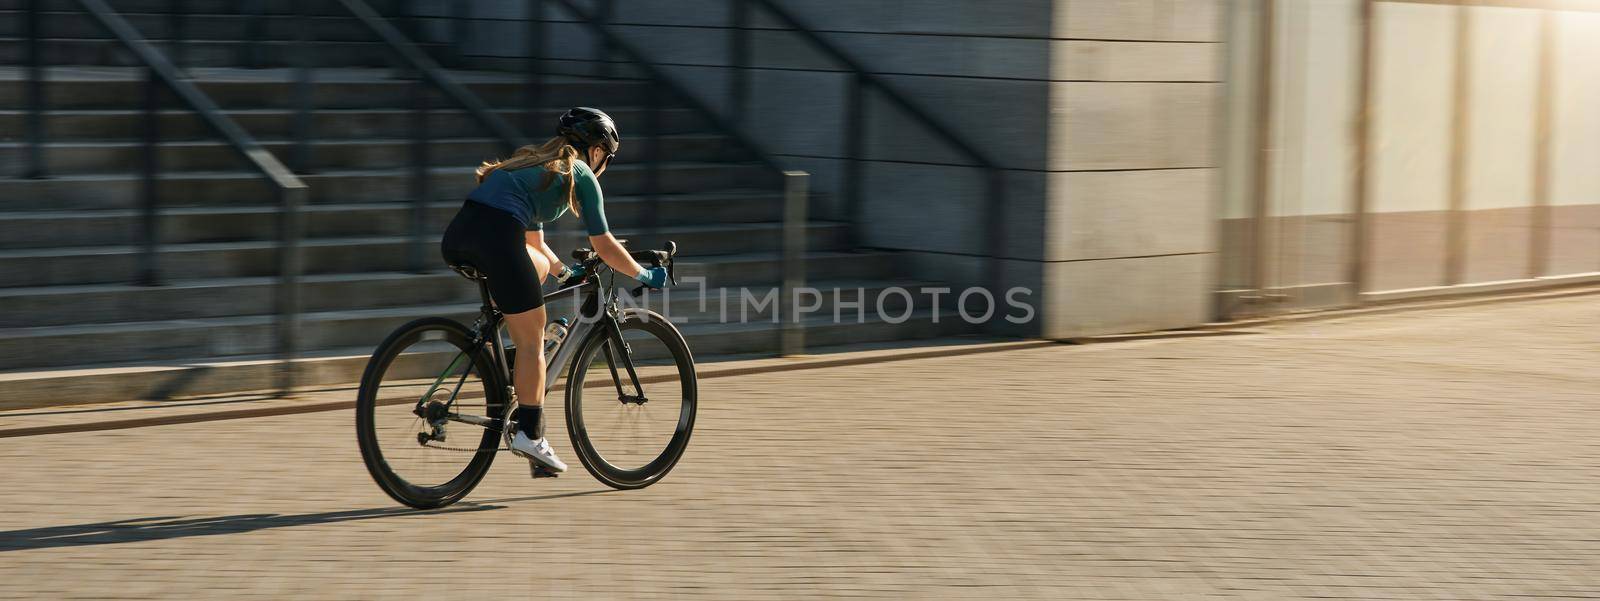 Professional female cyclist in cycling garment and protective gear riding bicycle in city, rushing and passing buildings while training outdoors on a daytime. Urban lifestyle, sports concept